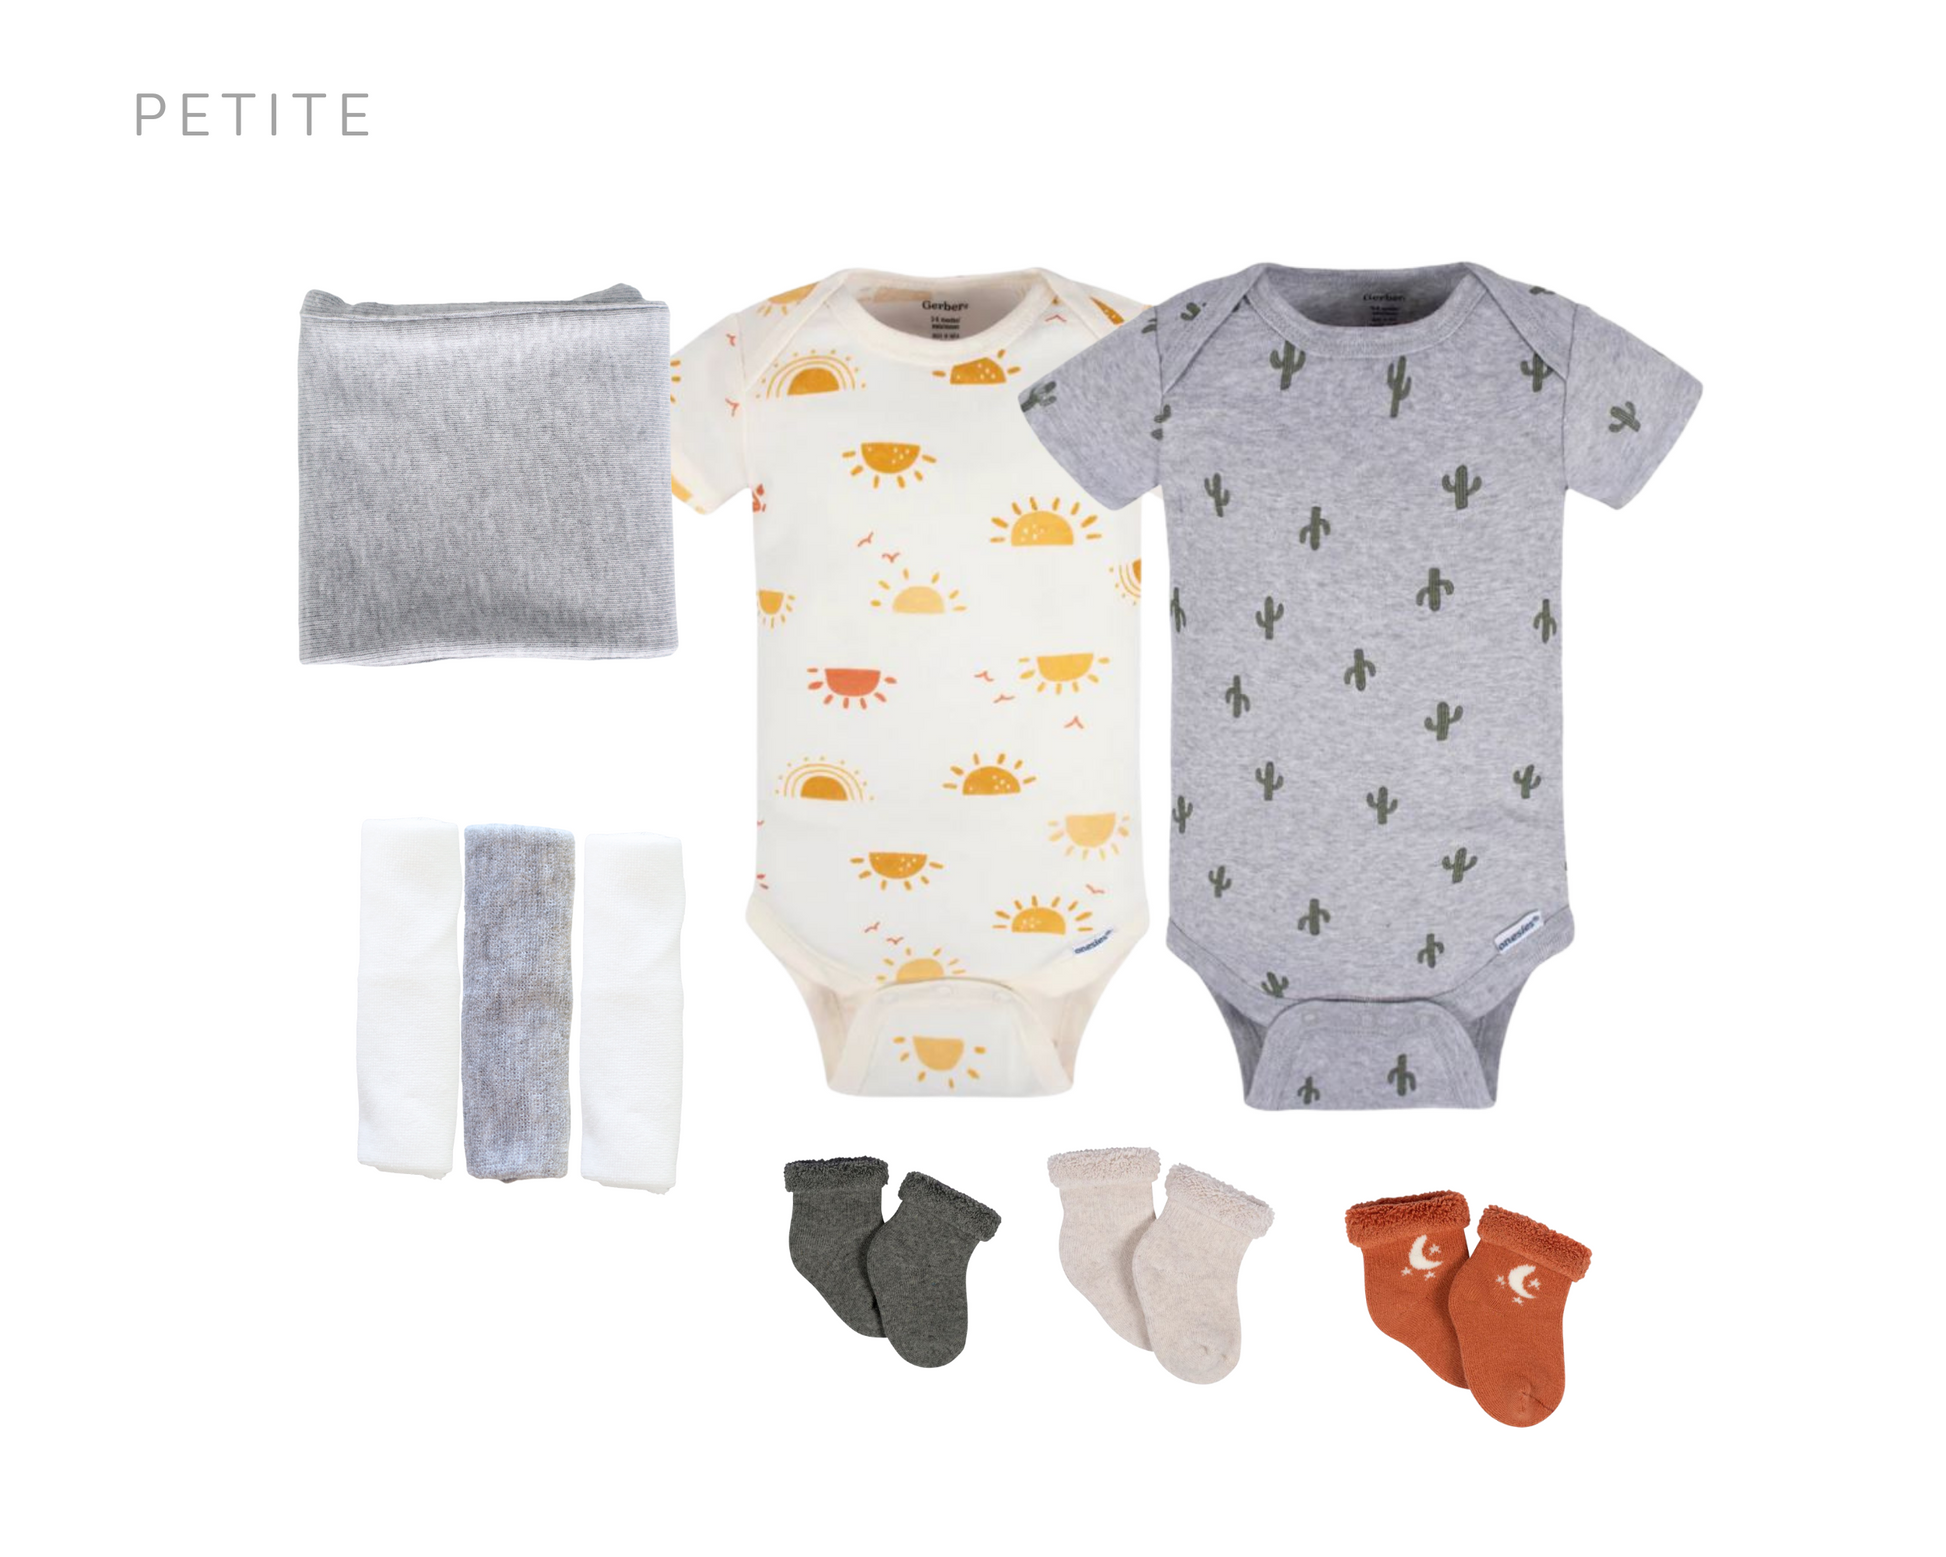 petite baby gift clothes